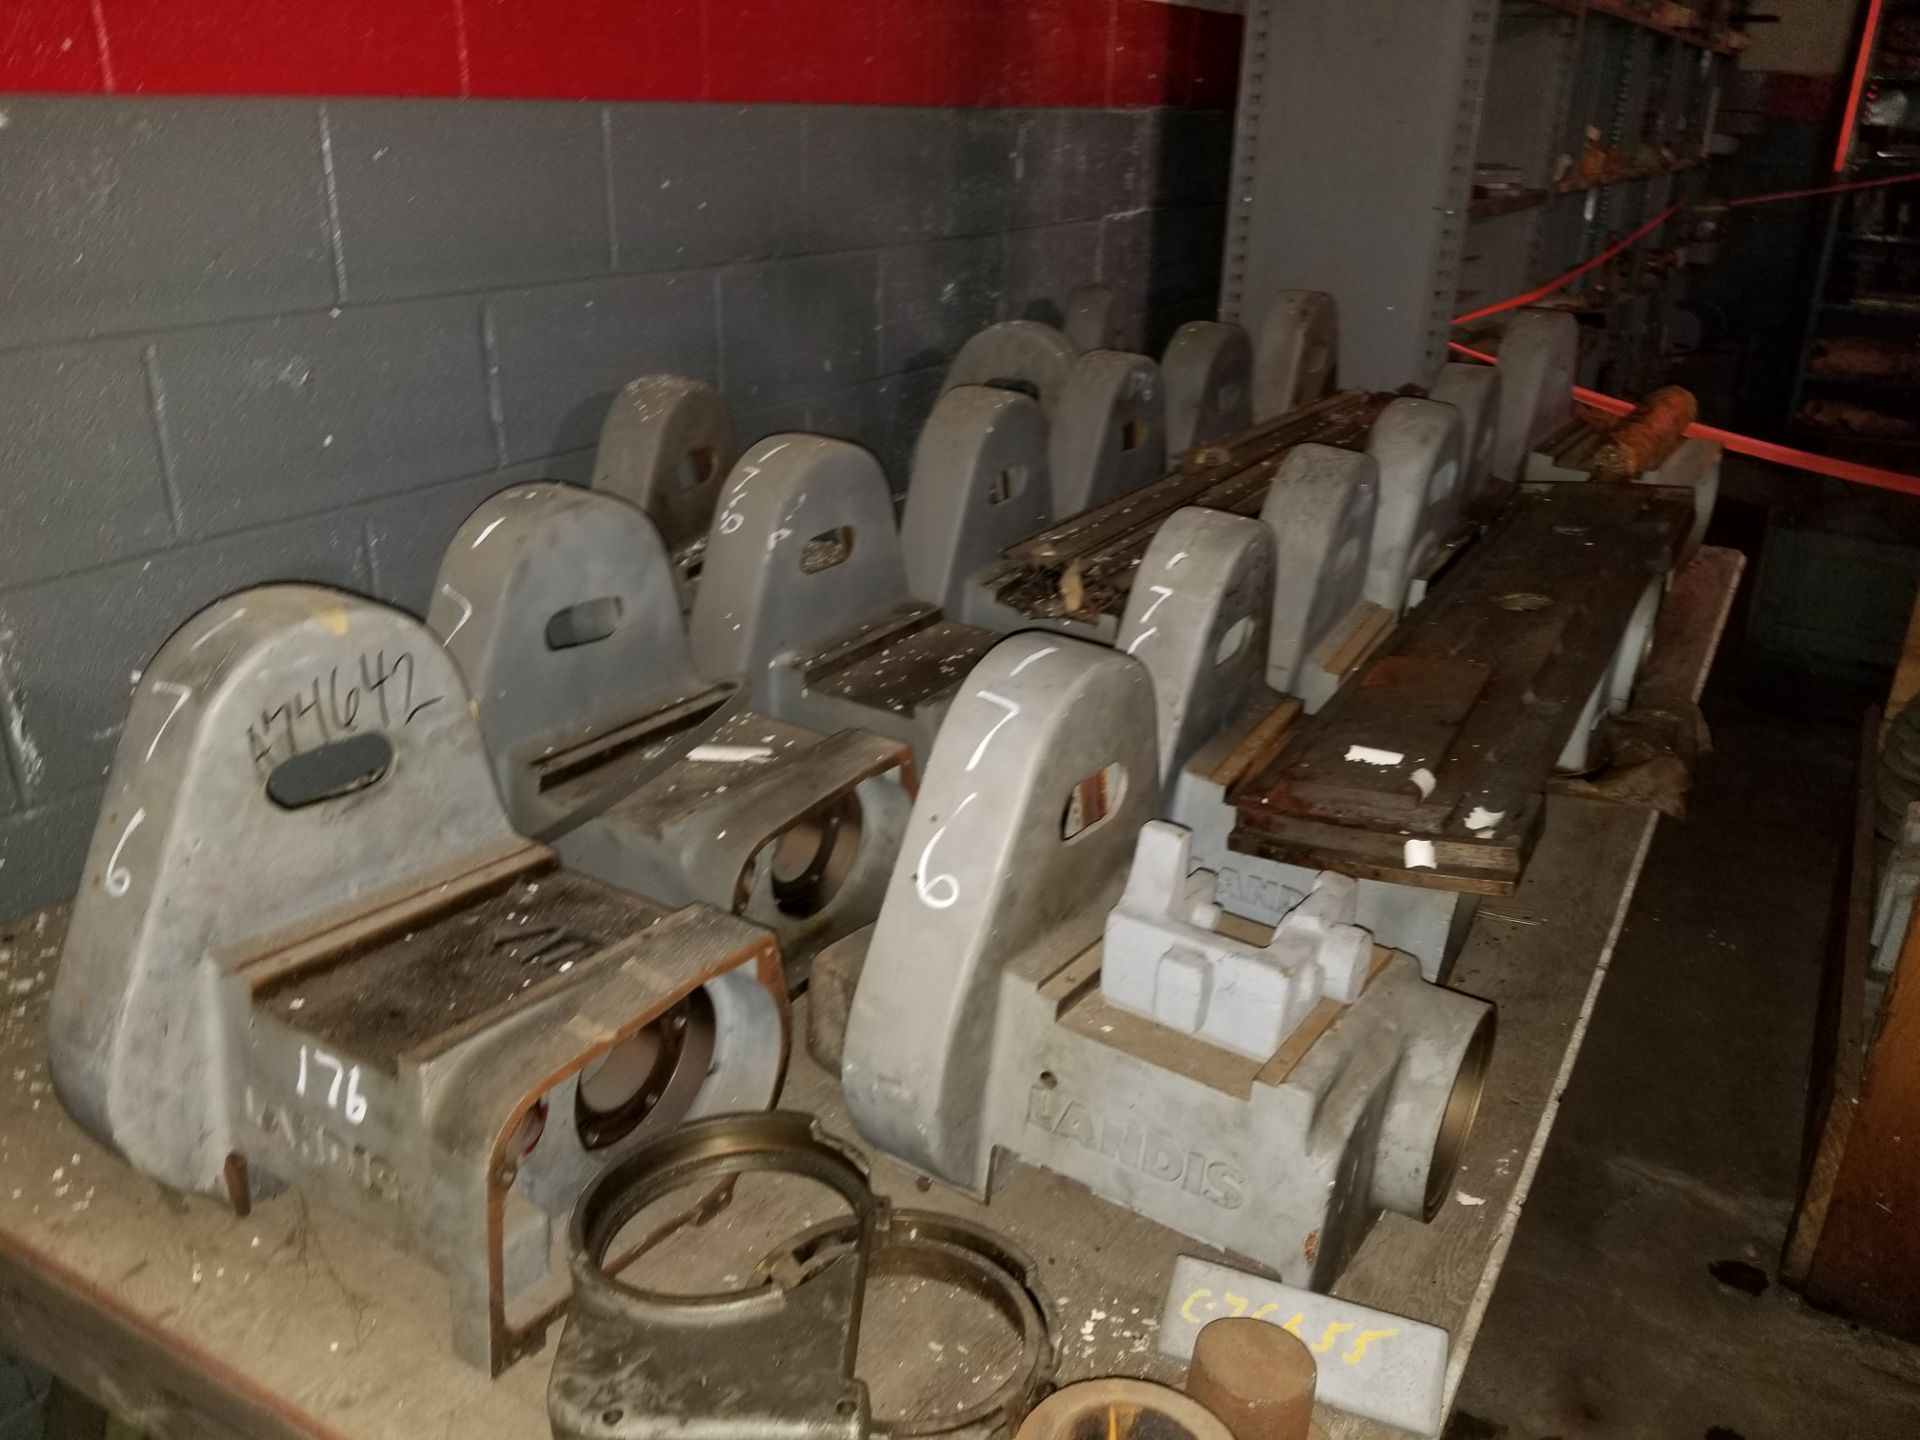 3 ct. Landis 1R Beds, 16 ct. Landis 1R Head Stock Castings & 4 Metal Bins with Misc. Parts - Image 5 of 5